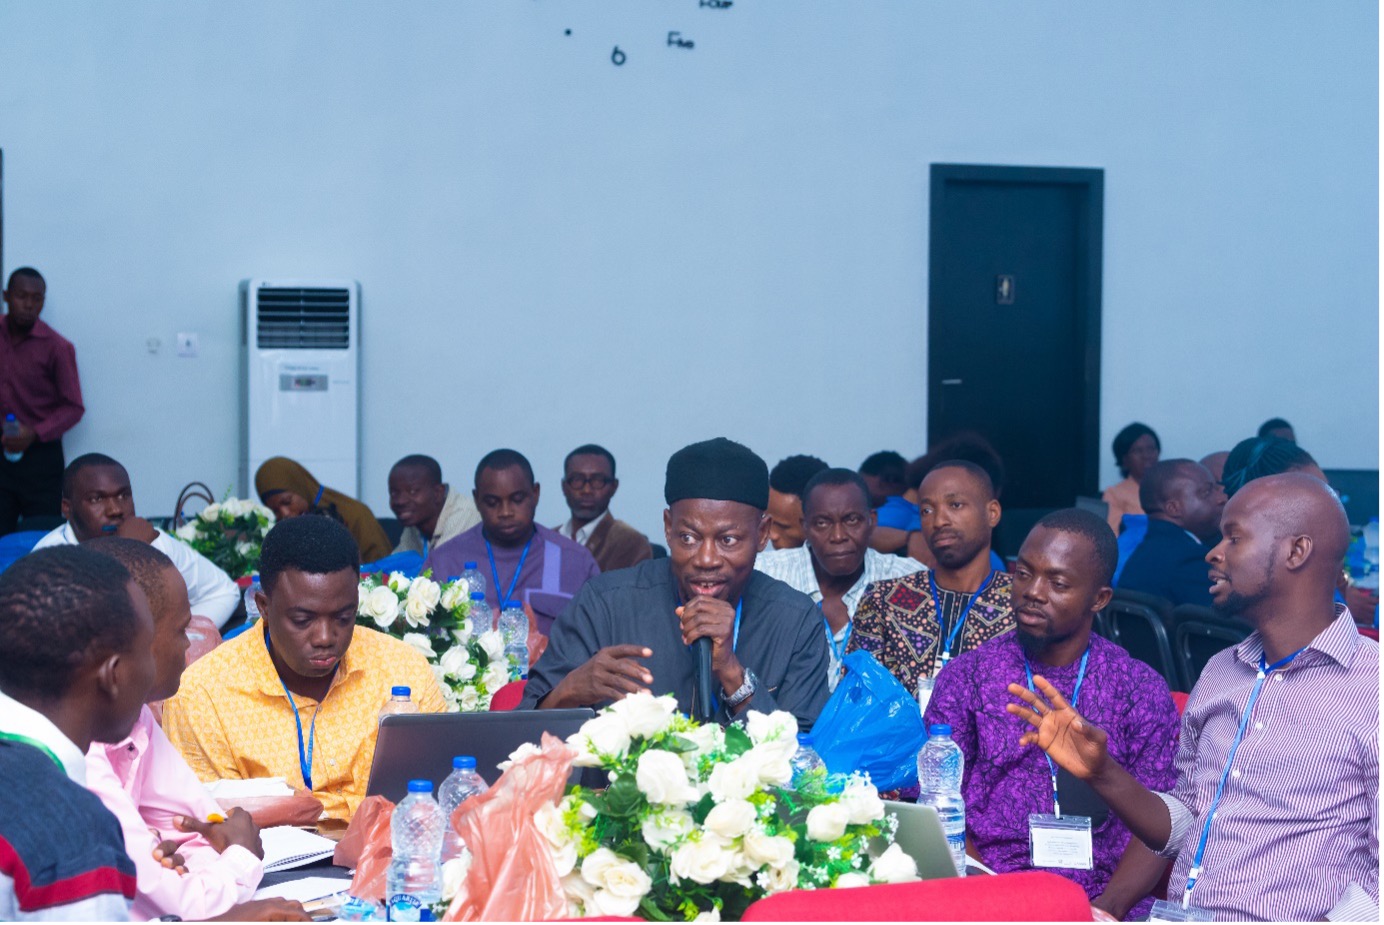 A cross-section of participants contributing during the workshop